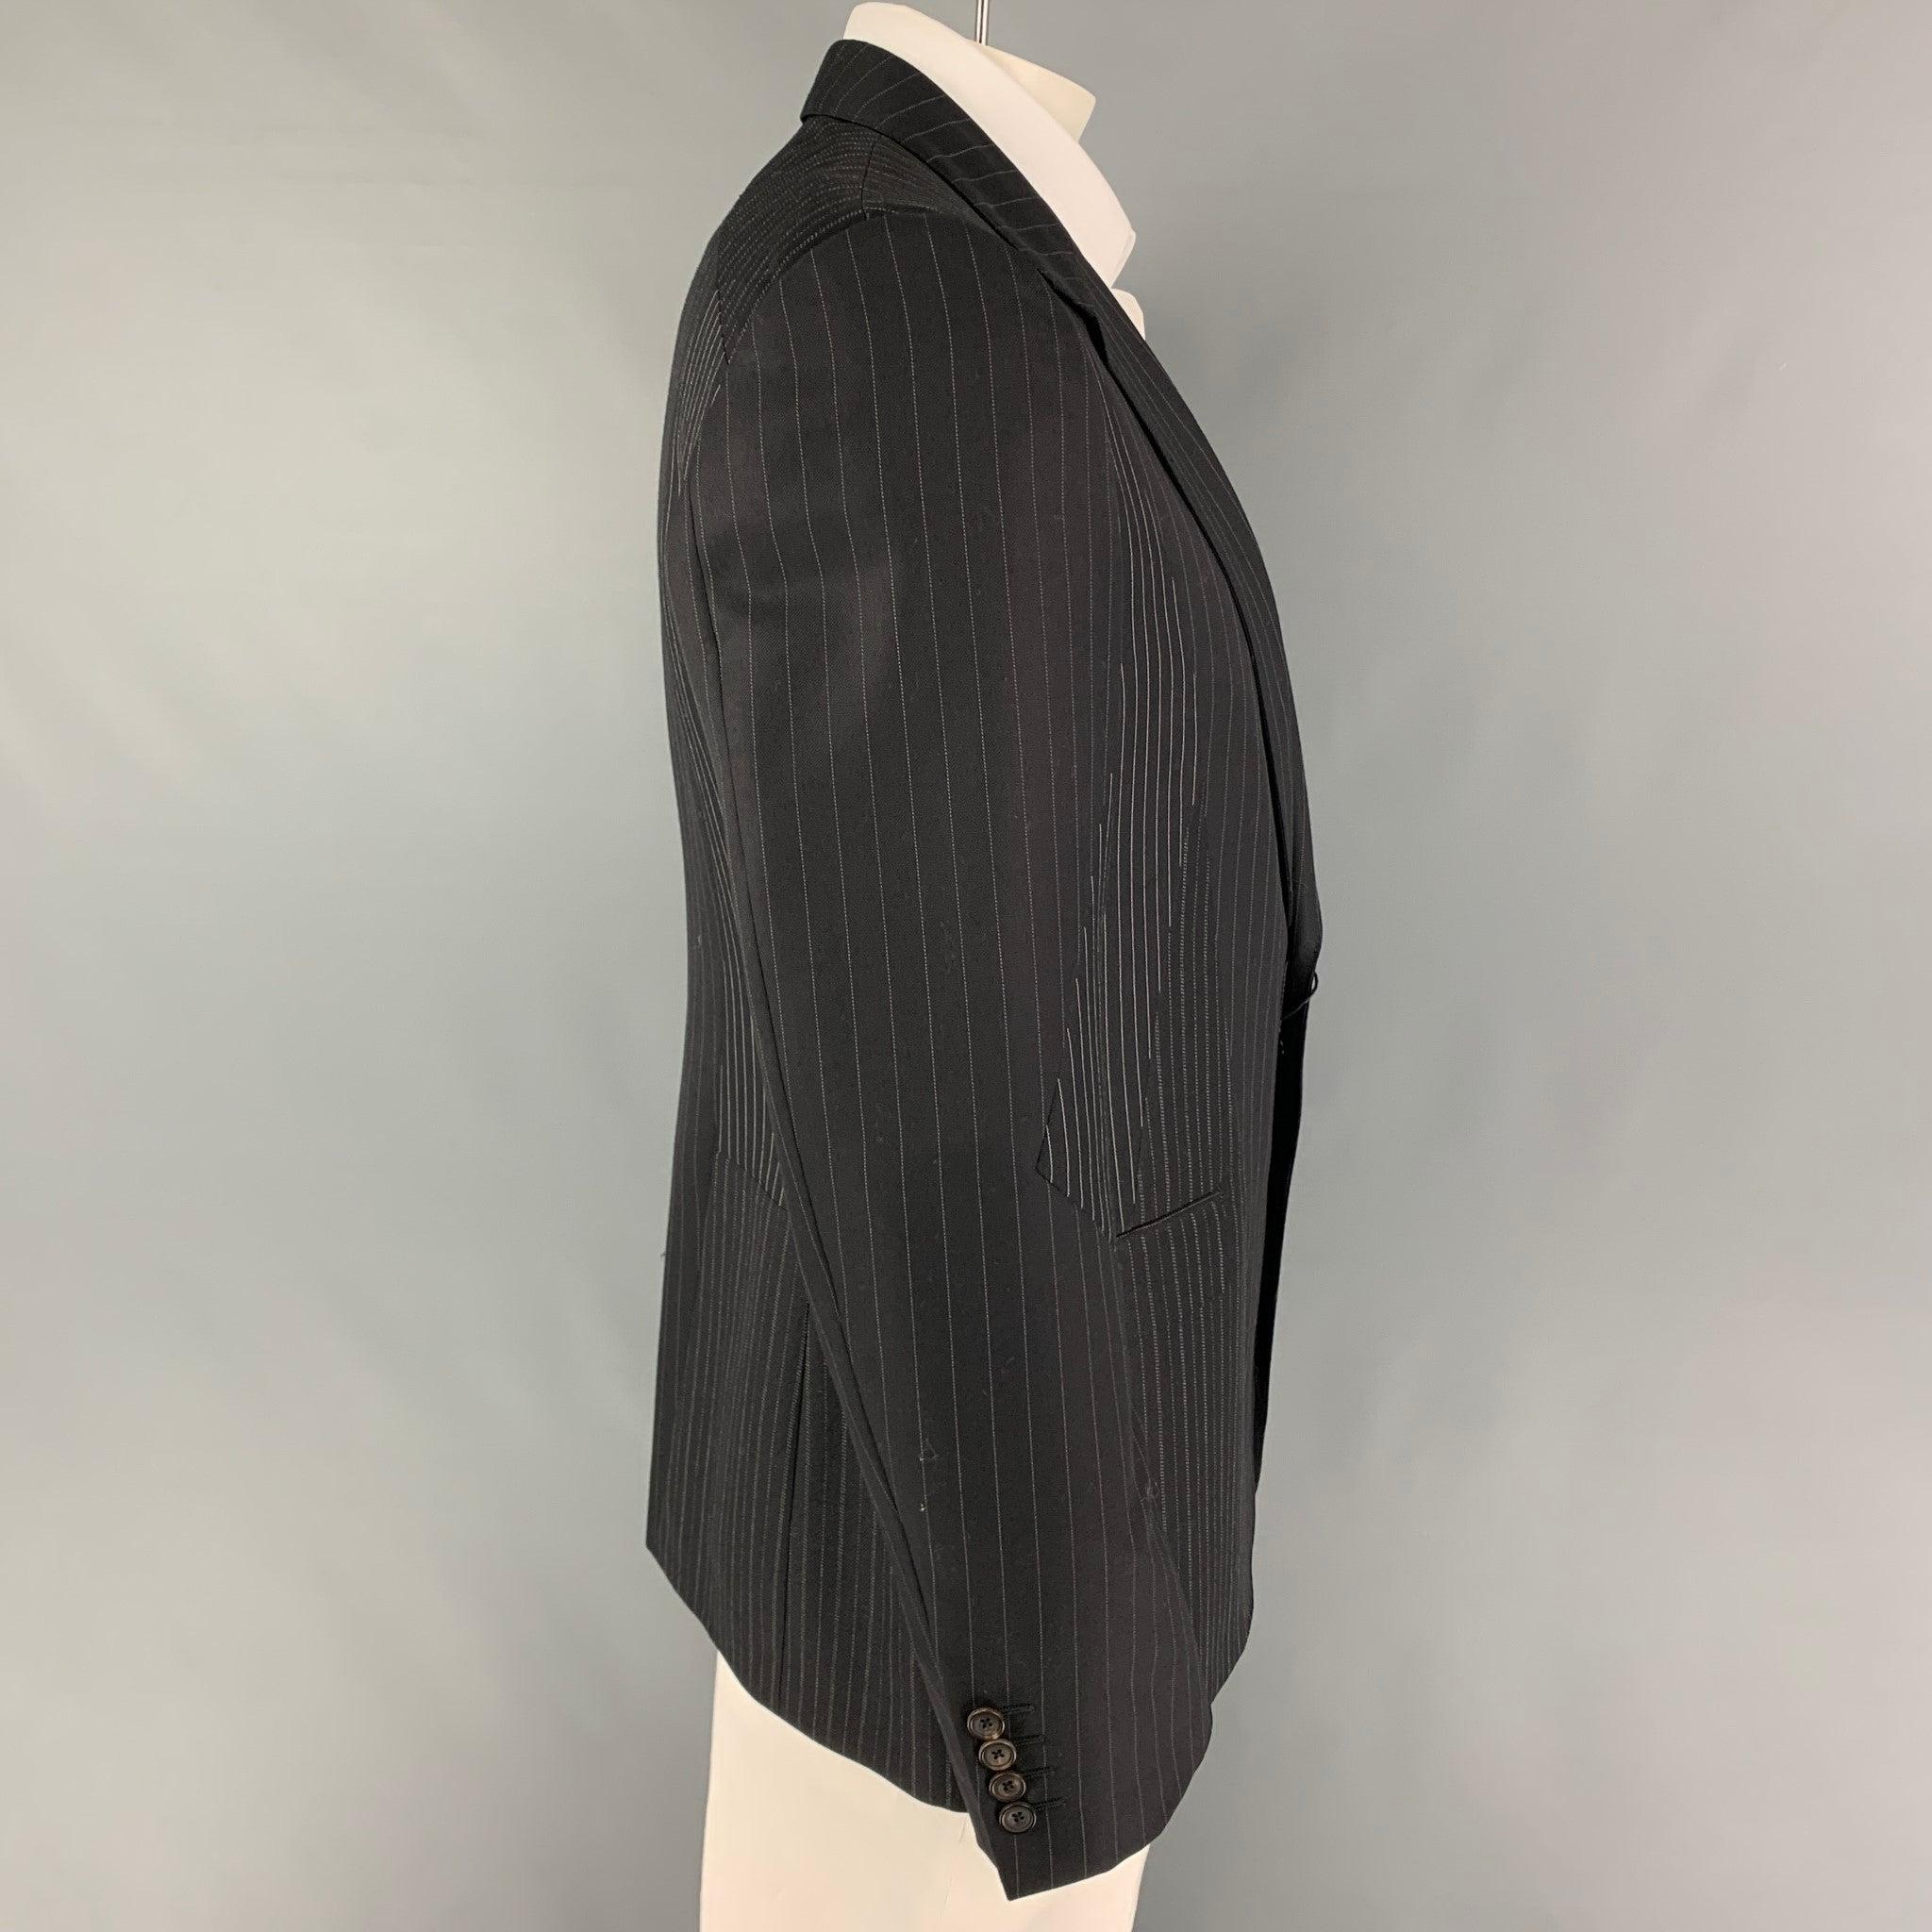 ALEXANDER McQUEEN sport coat comes in a black & white patchwork wool with a full liner featuring a notch lapel, flap pockets, single back vent, and a double button closure. Made in Italy.
New With Tags.
 

Marked:   54 

Measurements: 
 
Shoulder: